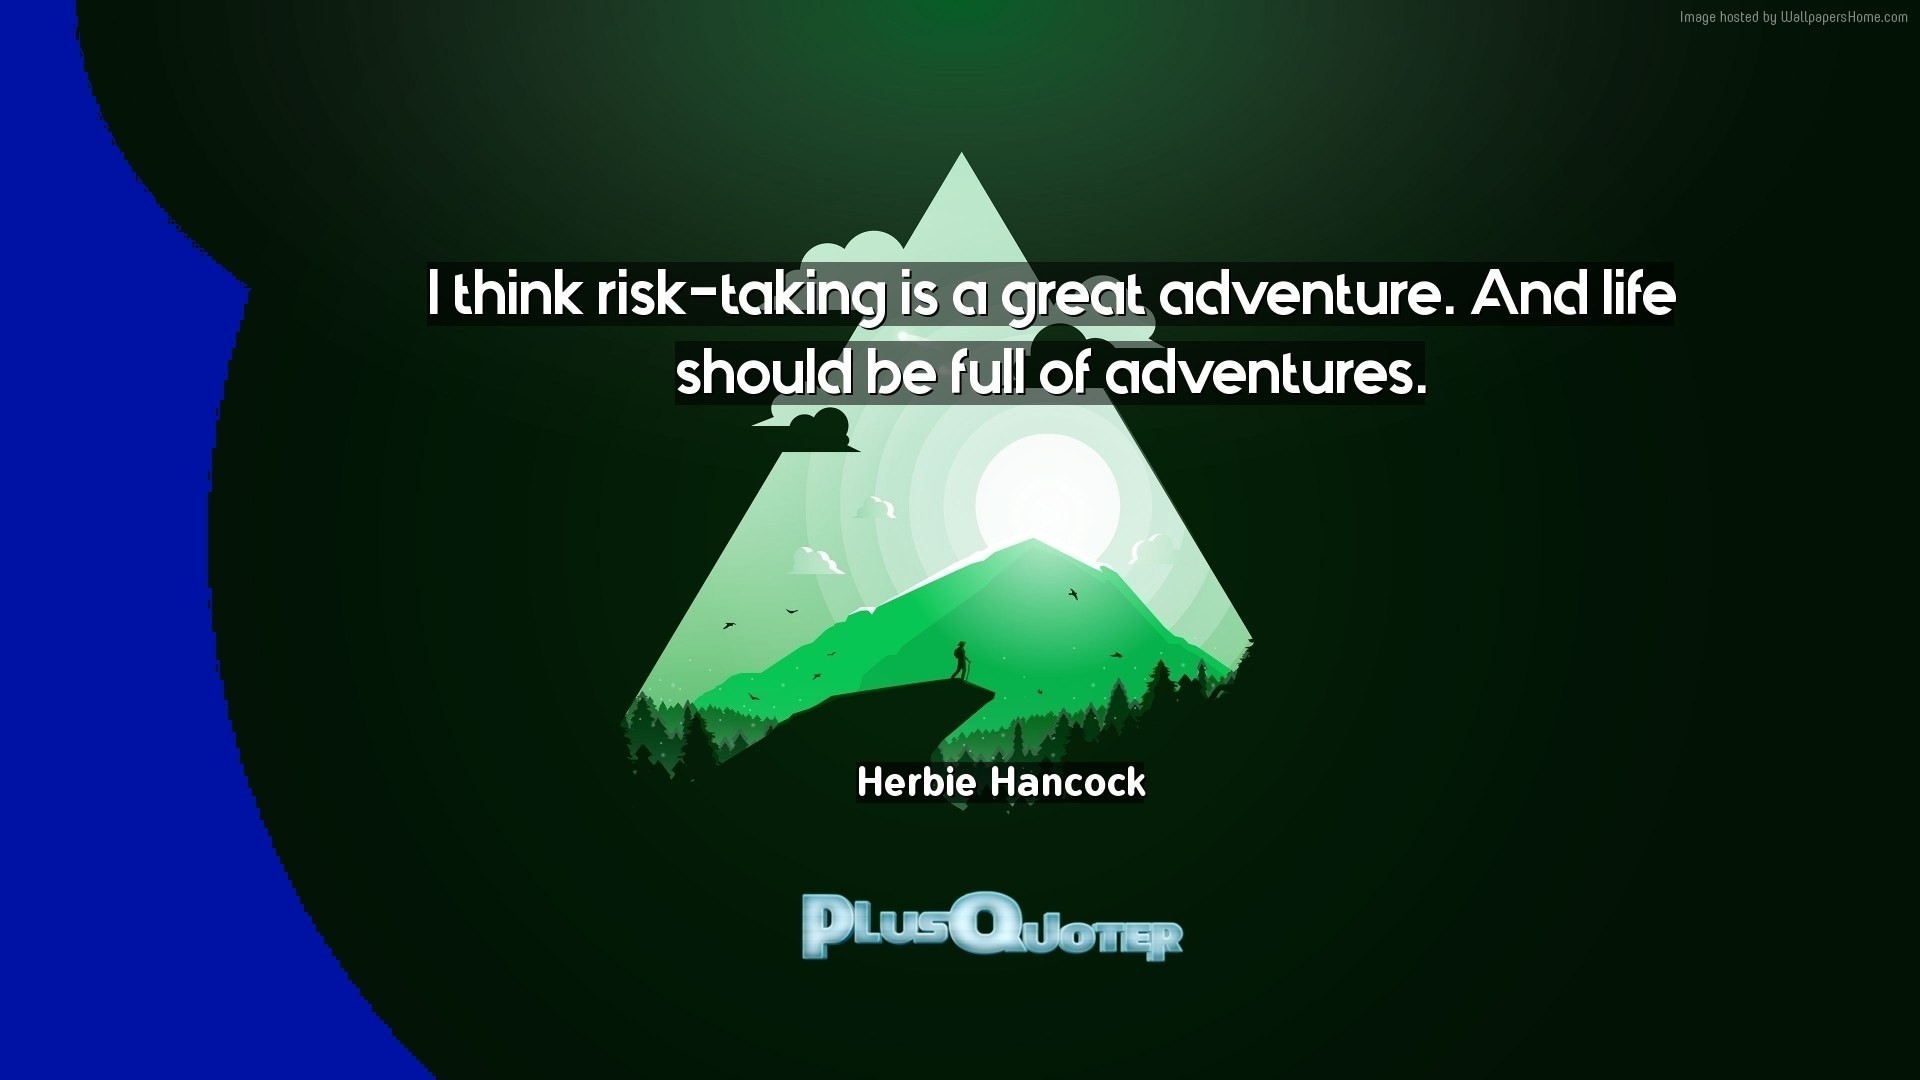 1920x1080 Download Wallpaper with inspirational Quotes- "I think risk-taking is a  great adventure